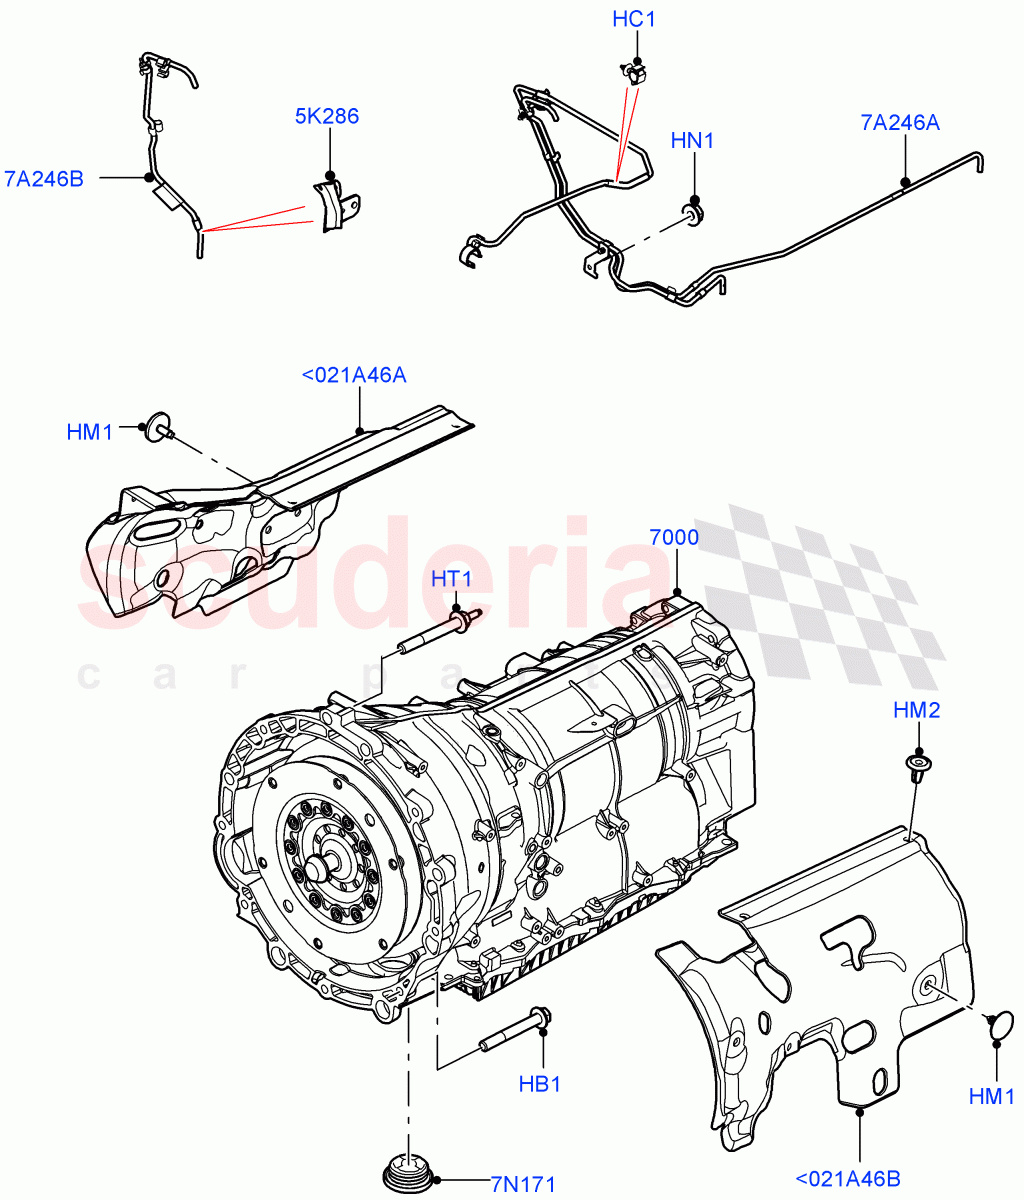 Auto Trans Assy & Speedometer Drive(3.0L AJ20D6 Diesel High,8 Speed Auto Trans ZF 8HP76)((V)FROMLA000001) of Land Rover Land Rover Range Rover (2012-2021) [3.0 I6 Turbo Diesel AJ20D6]